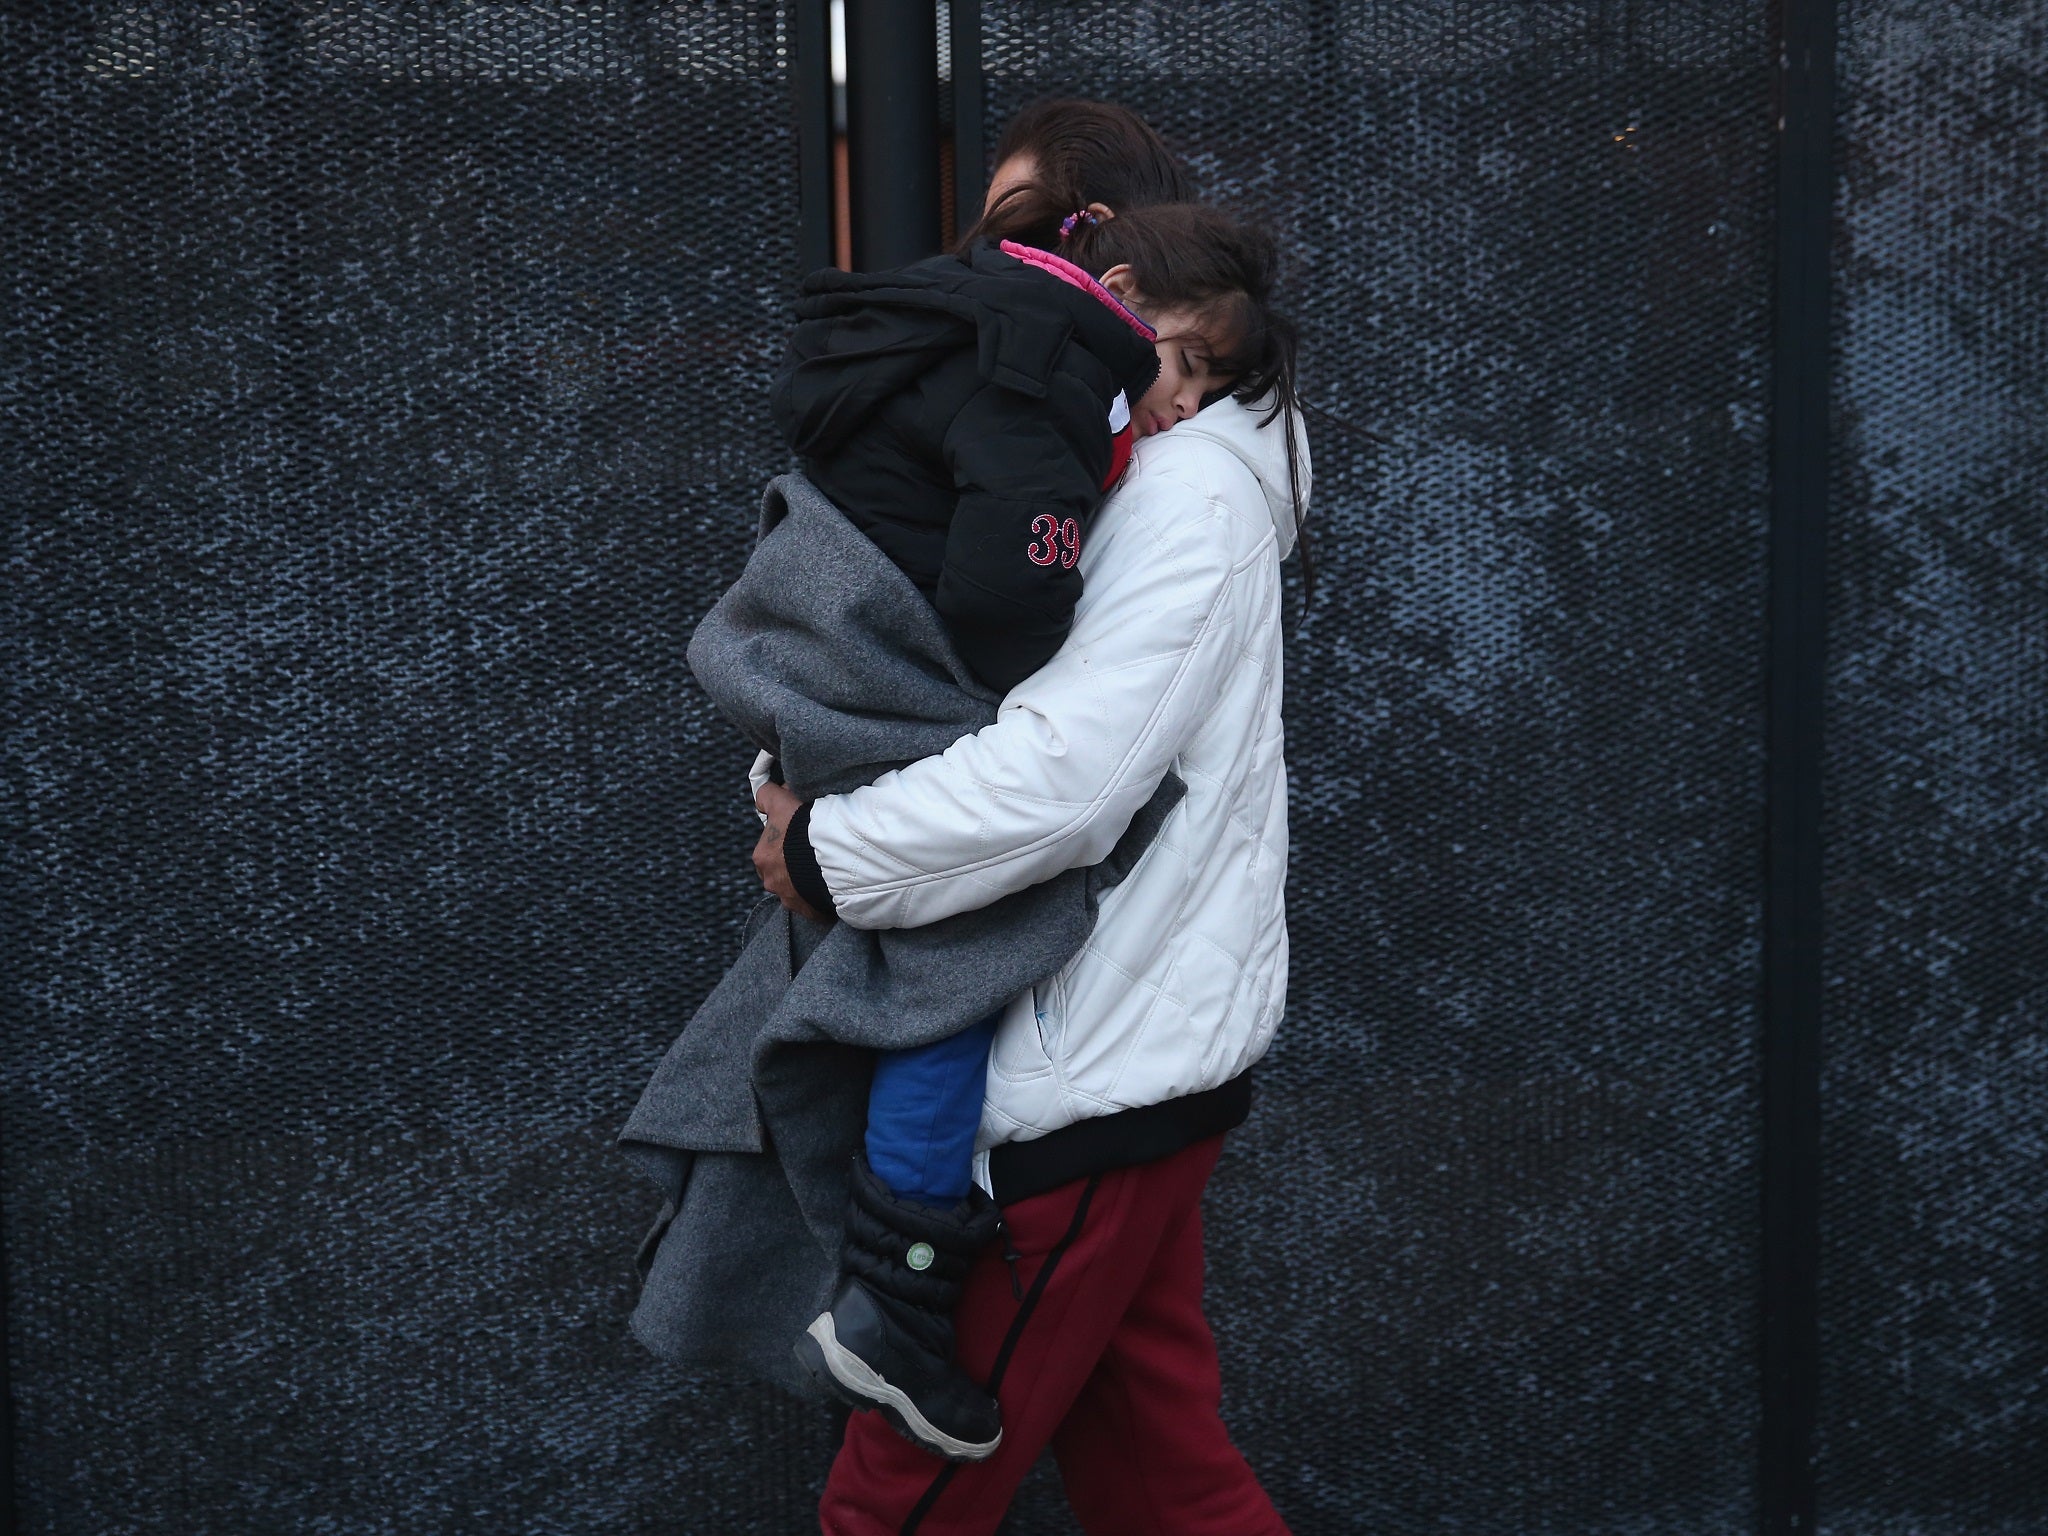 One couple waited 10 months for asylum support, during which they struggled to feed their young child and baby and could not afford to heat their home during the winter months, report found